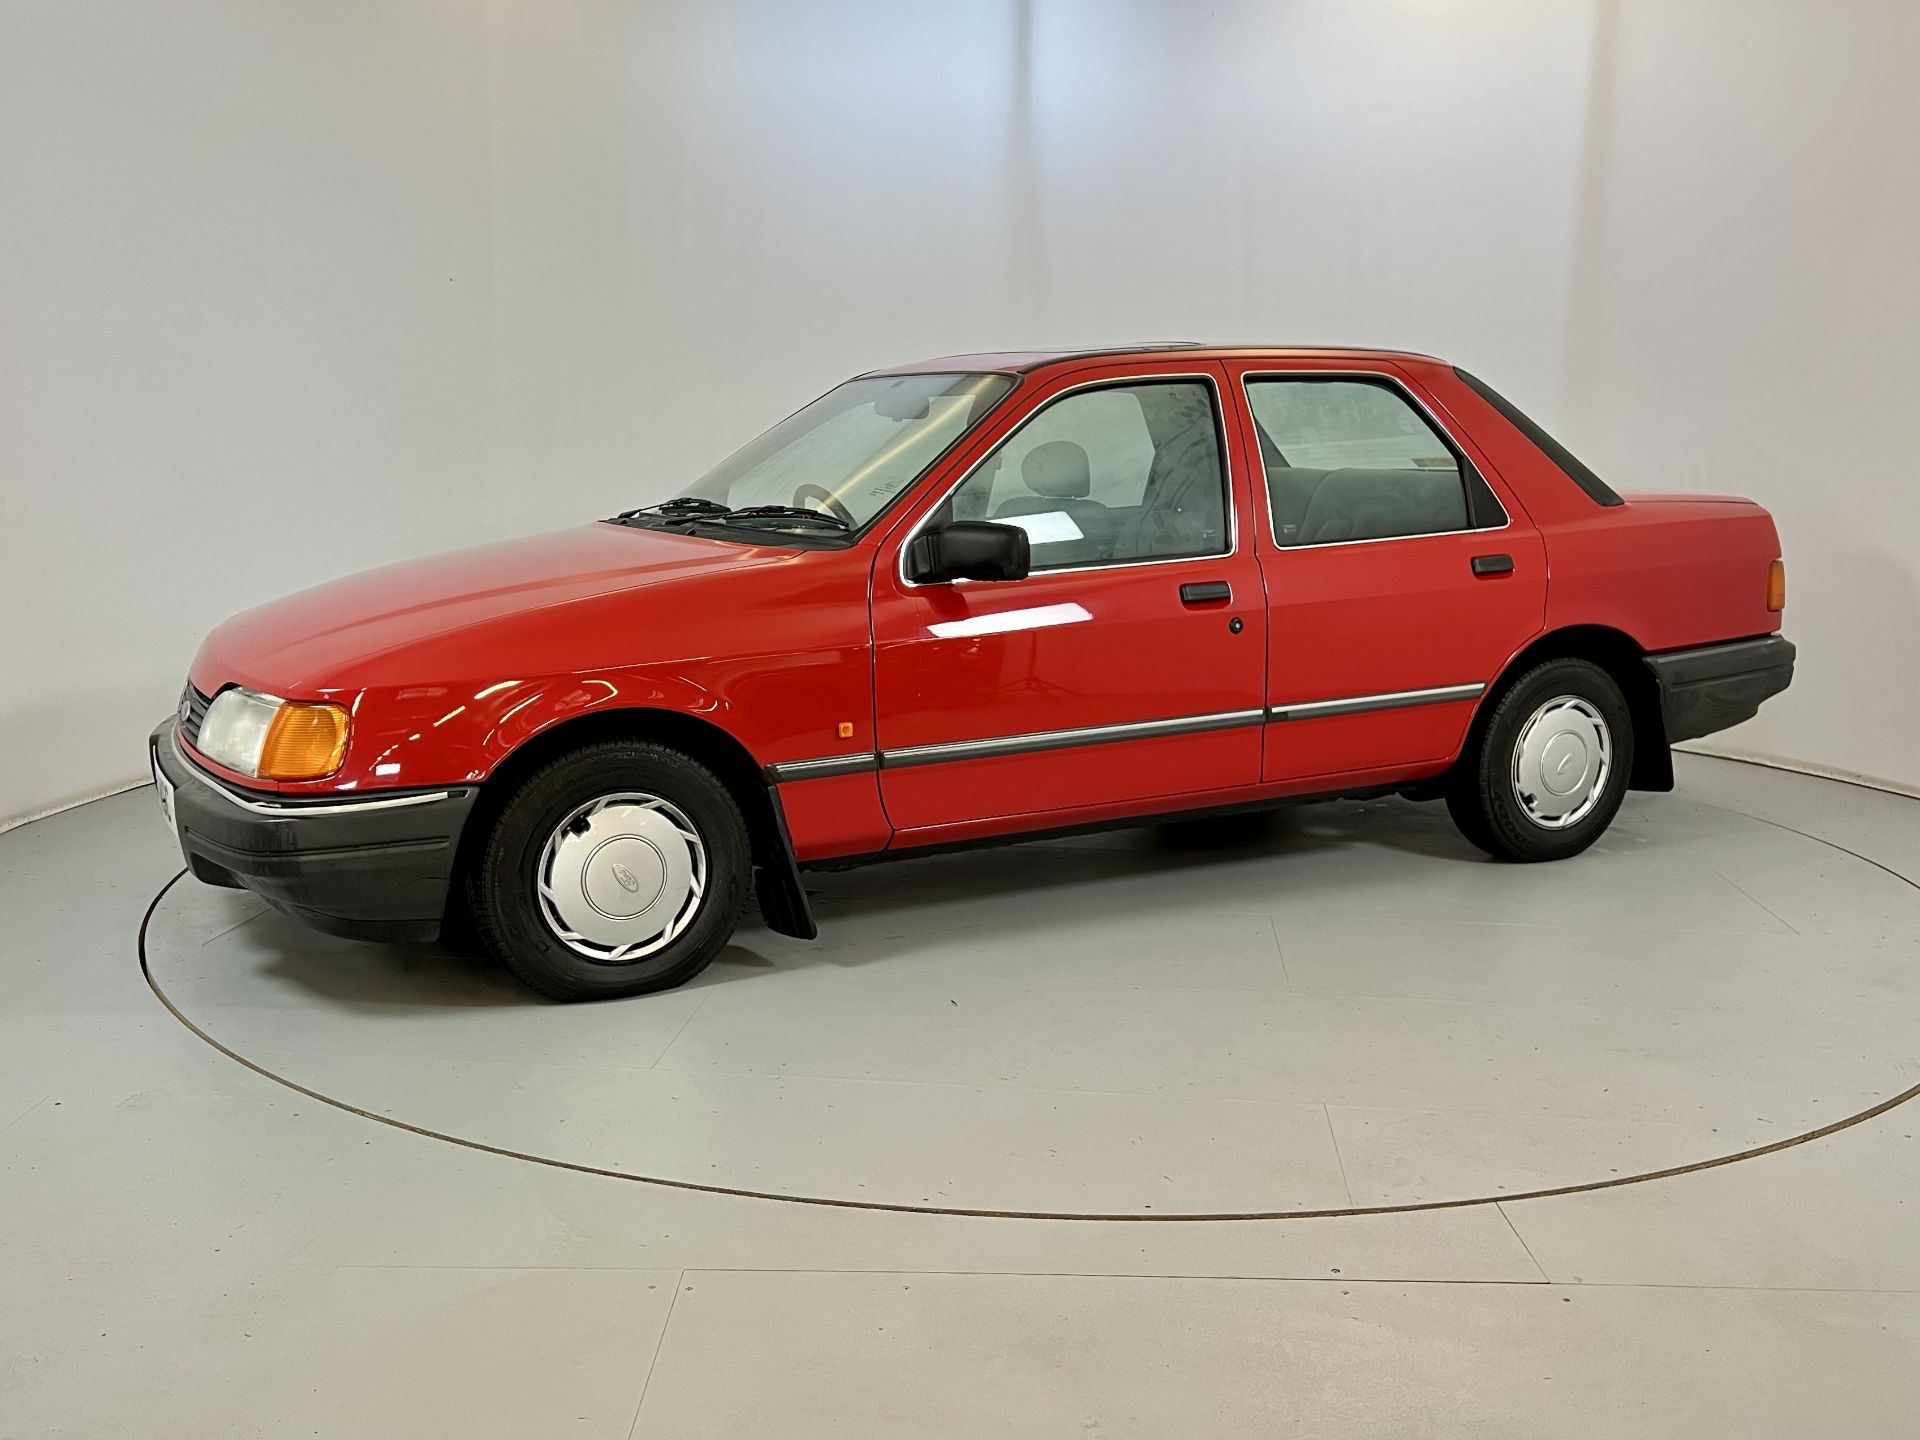 Ford Sierra Sapphire - Image 4 of 34